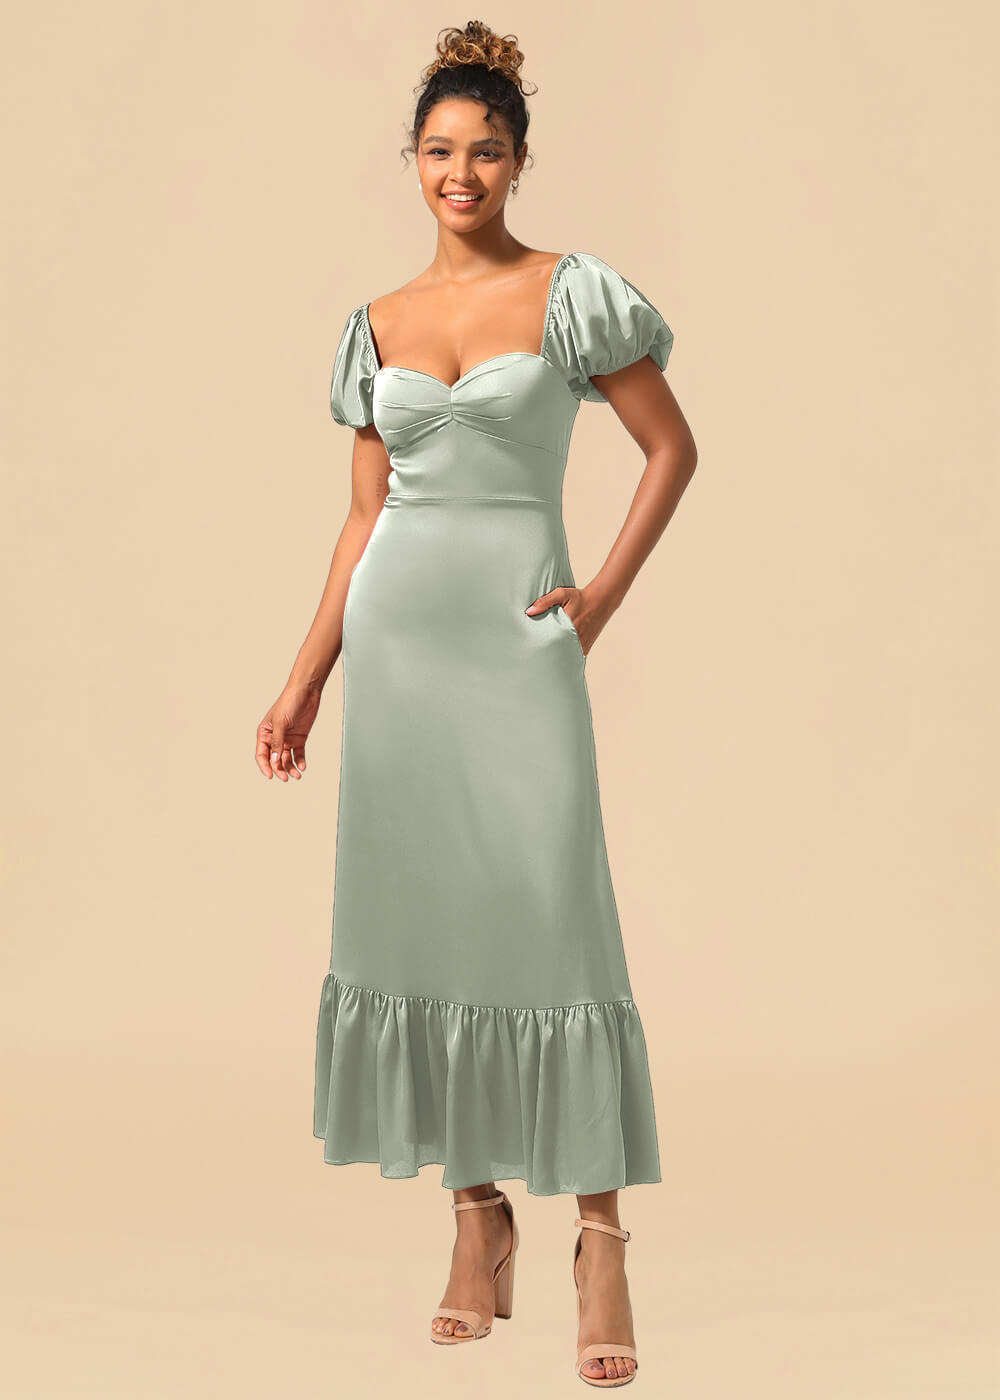 Satin A-line Ankle Length Sweetheart Puff Sleeve Bridesmaid Dress with Pockets